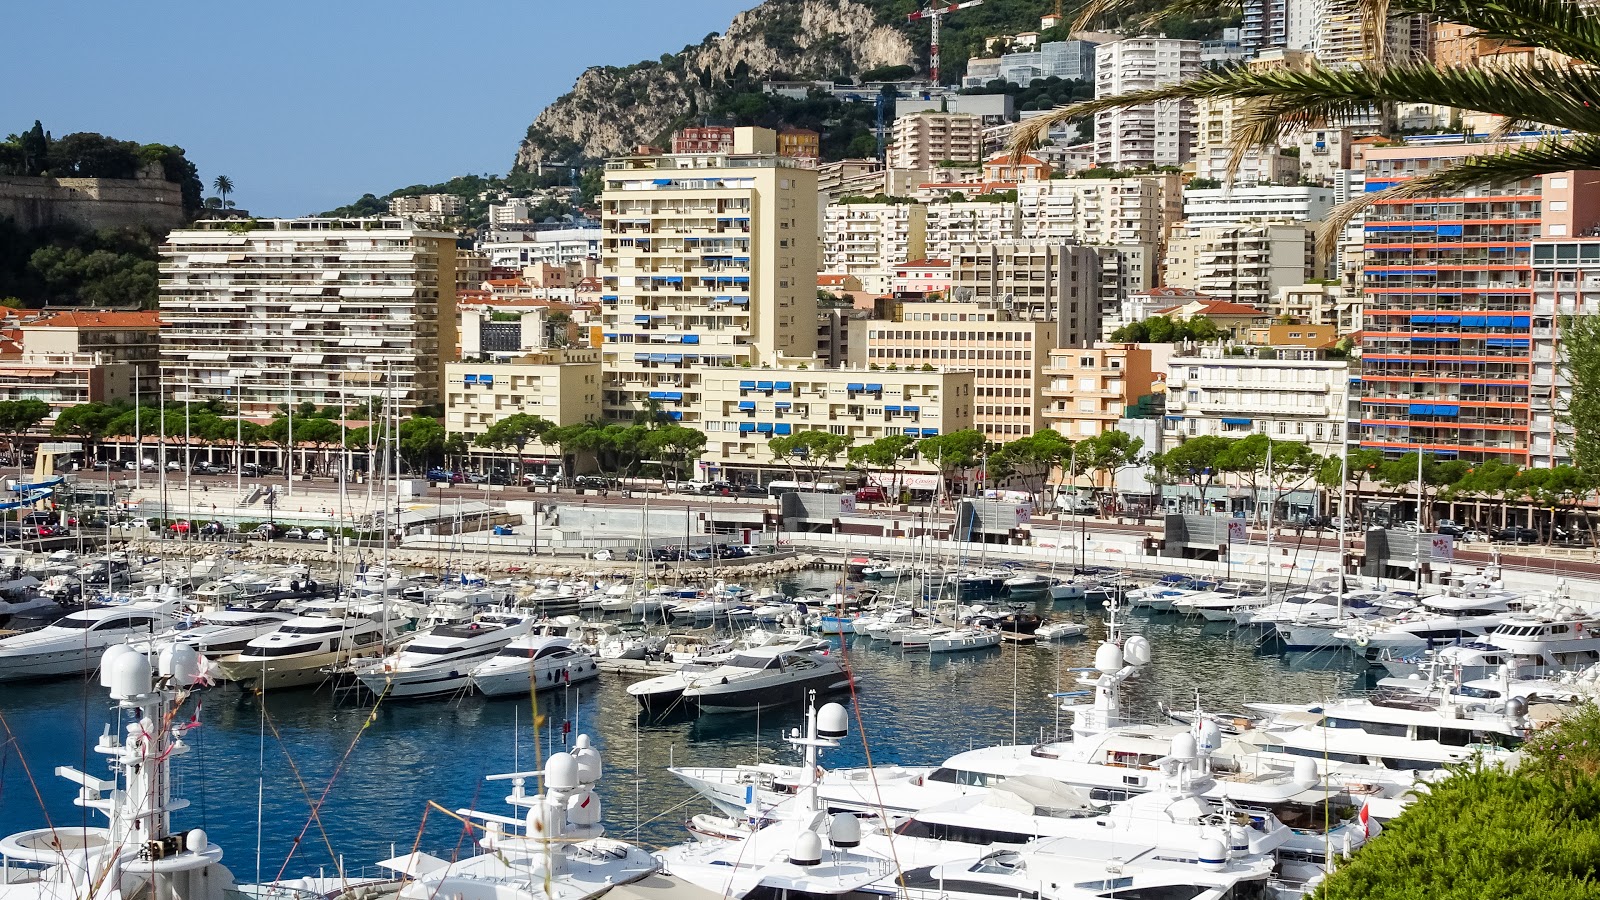 Monaco - One day in the 2nd smallest country - Sven's Travel Venues